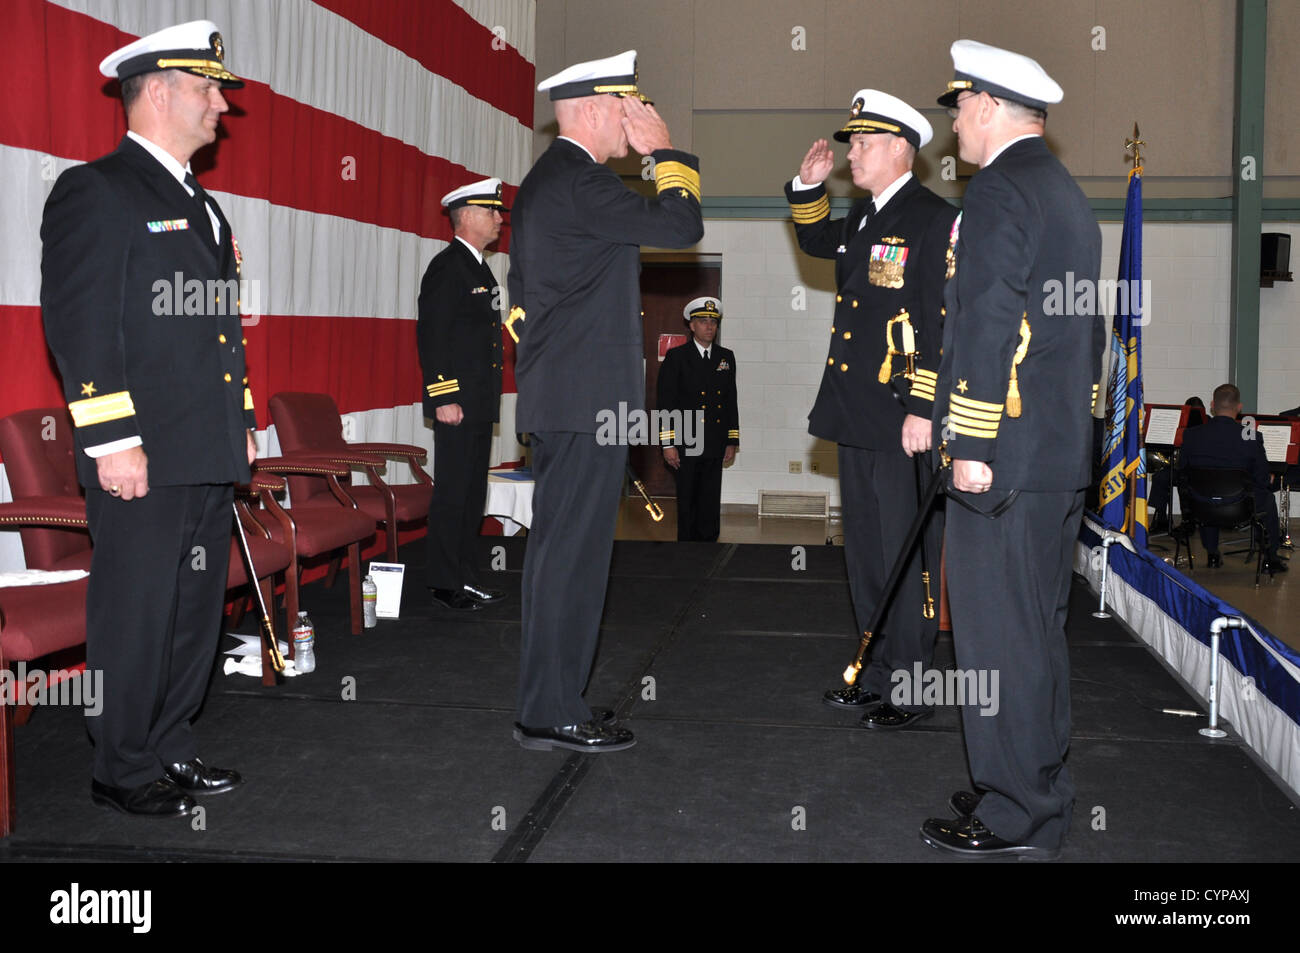 FORT WORTH, Texas (Nov. 3, 2012) Vice Adm. Scott H. Swift, commander of the U.S. 7th Fleet, returns a salute from Capt. Kevin C. Hayes, incoming commanding officer of Naval Reserve (NR) U.S. 7th Fleet during a change of command ceremony Stock Photo